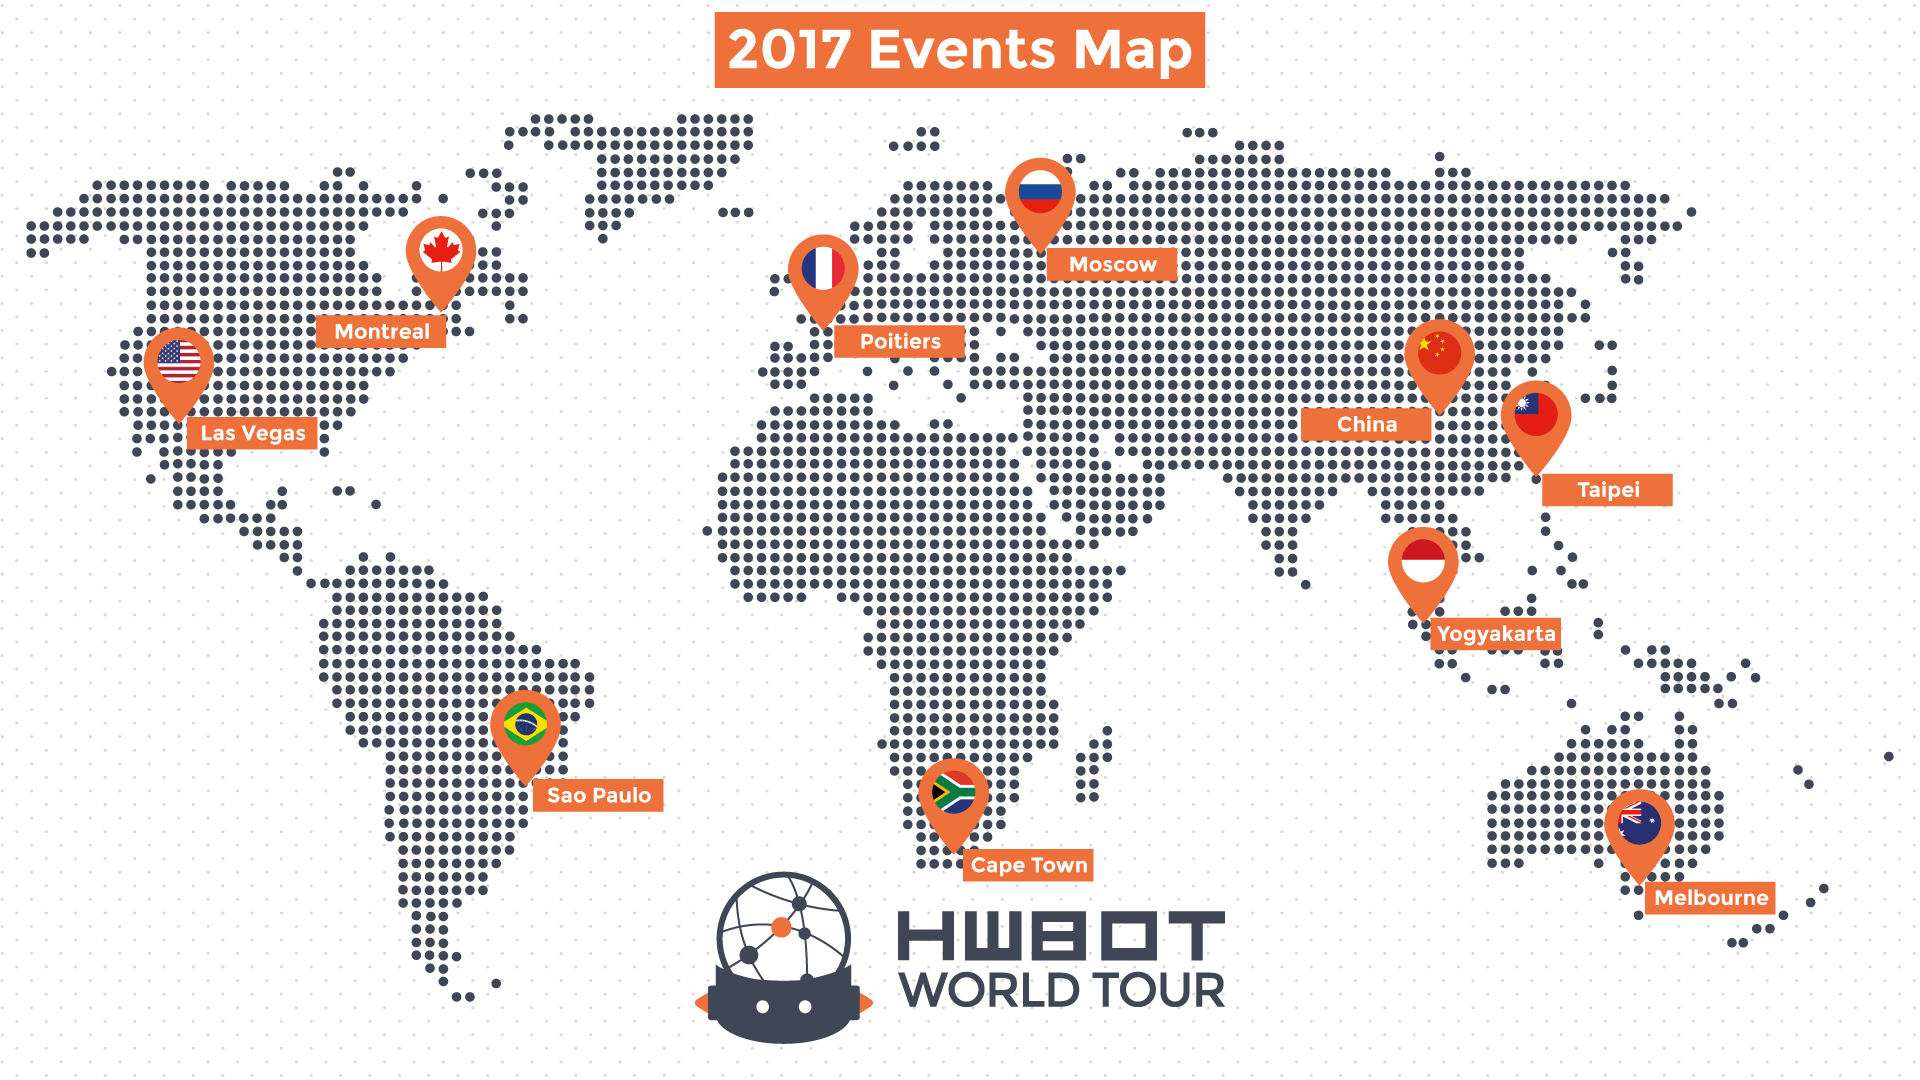 Map of the HWBOT World Tour 2017 events